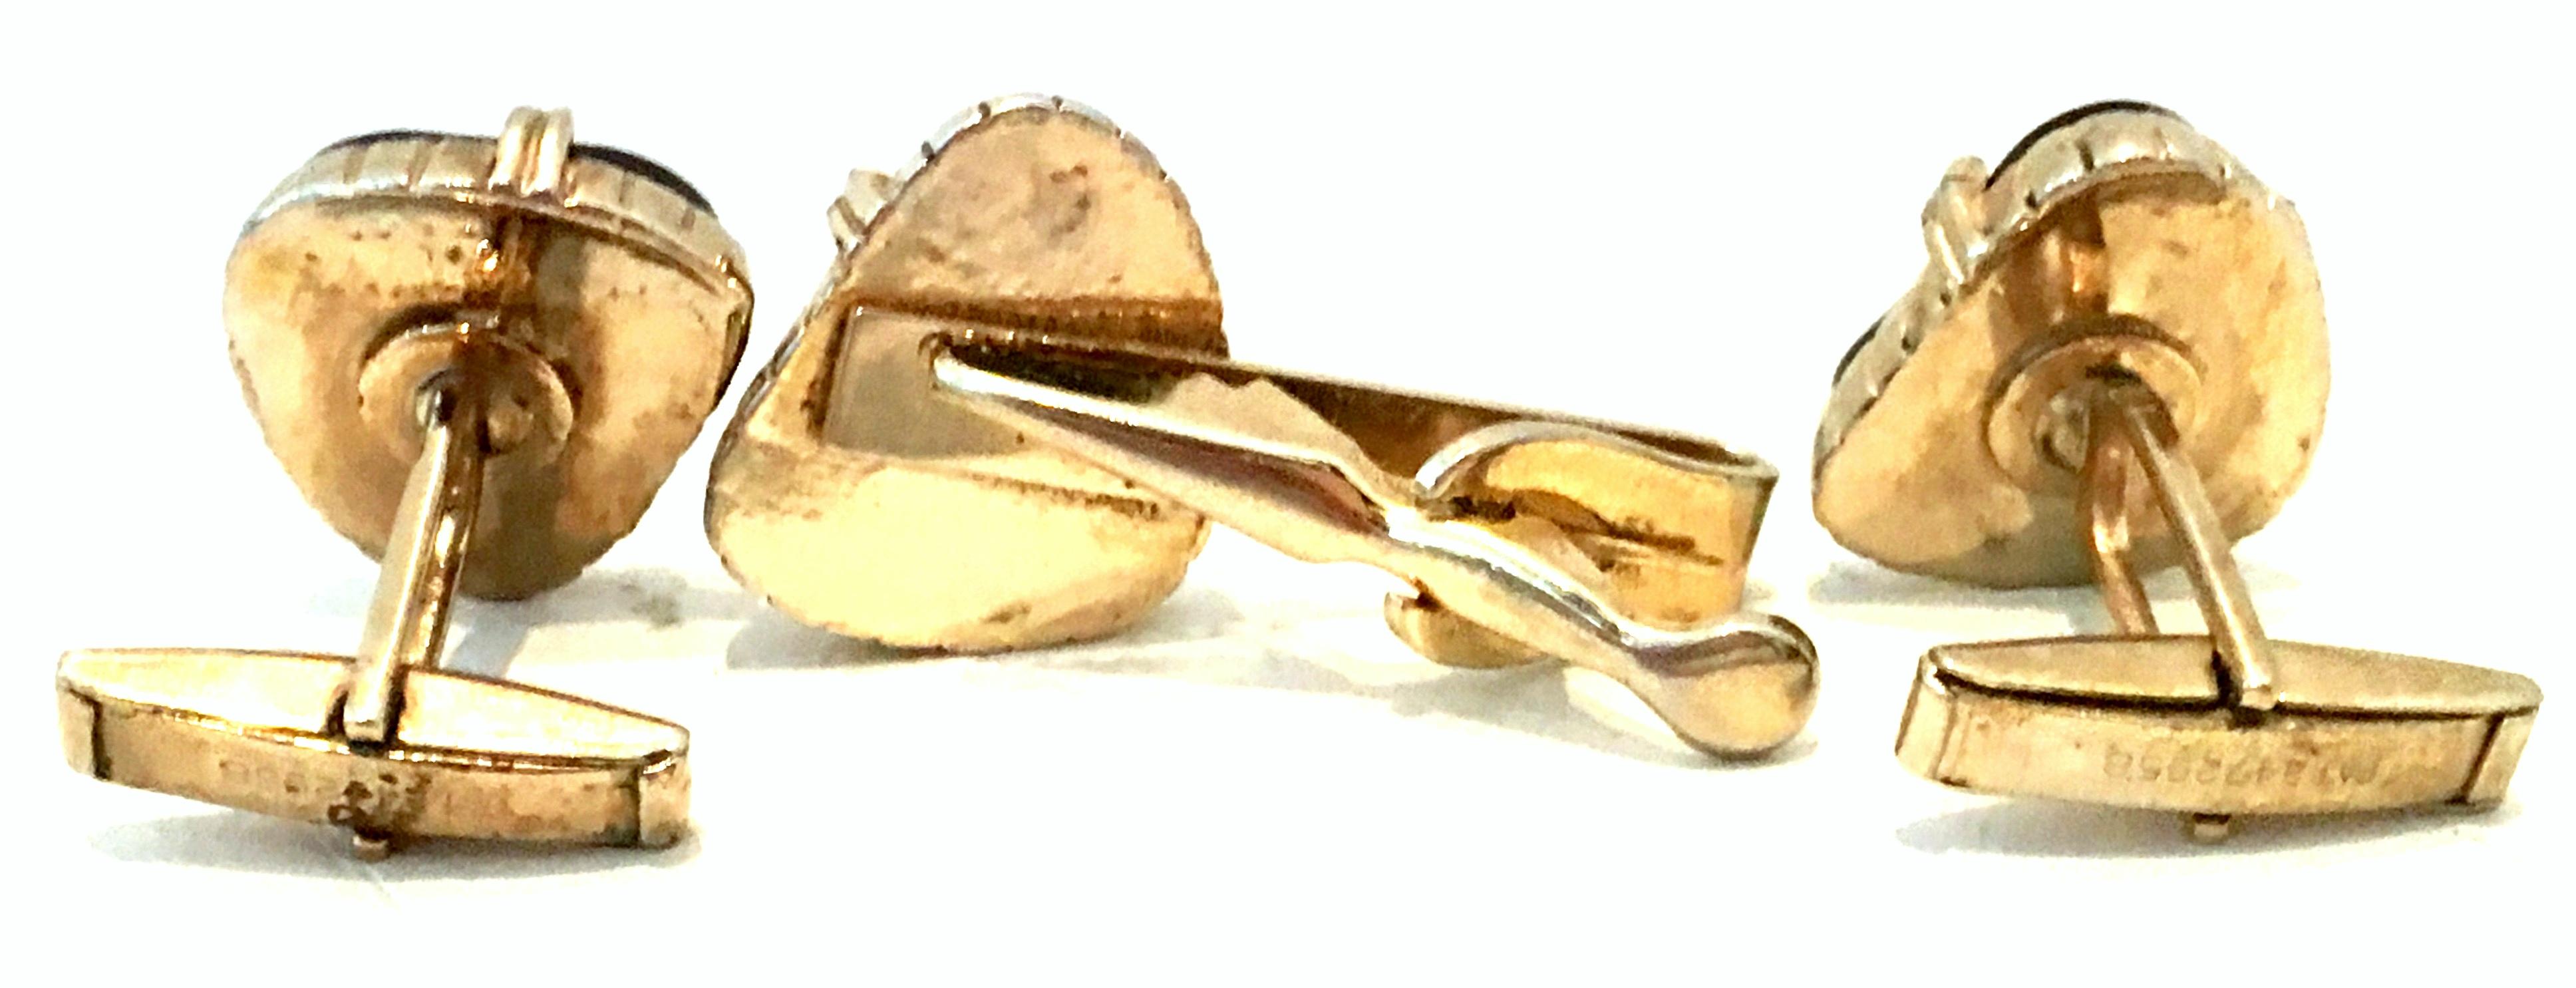 Mid-20th Century Gold Plate & Lucite Pair Of Cuff Links & Tie Clip S/3 For Sale 4